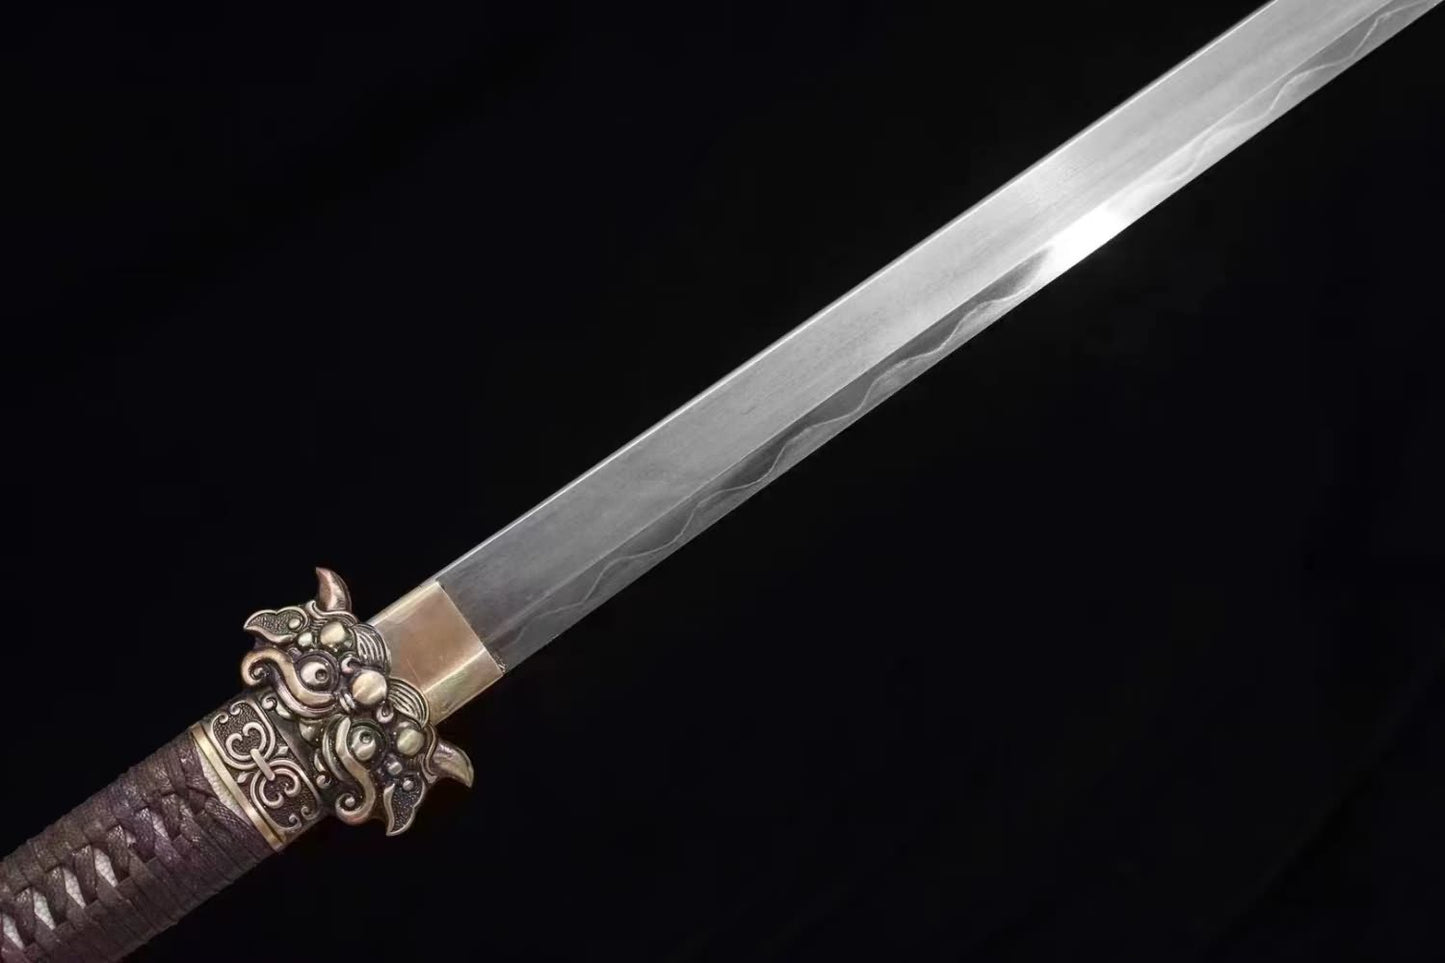 Dragon Roaring Tang Sword-Damascus Steel Blade, Soil Quenched,Purple Copper Scabbard, Brass Fittings.Perfect for Collectors and Enthusiasts.